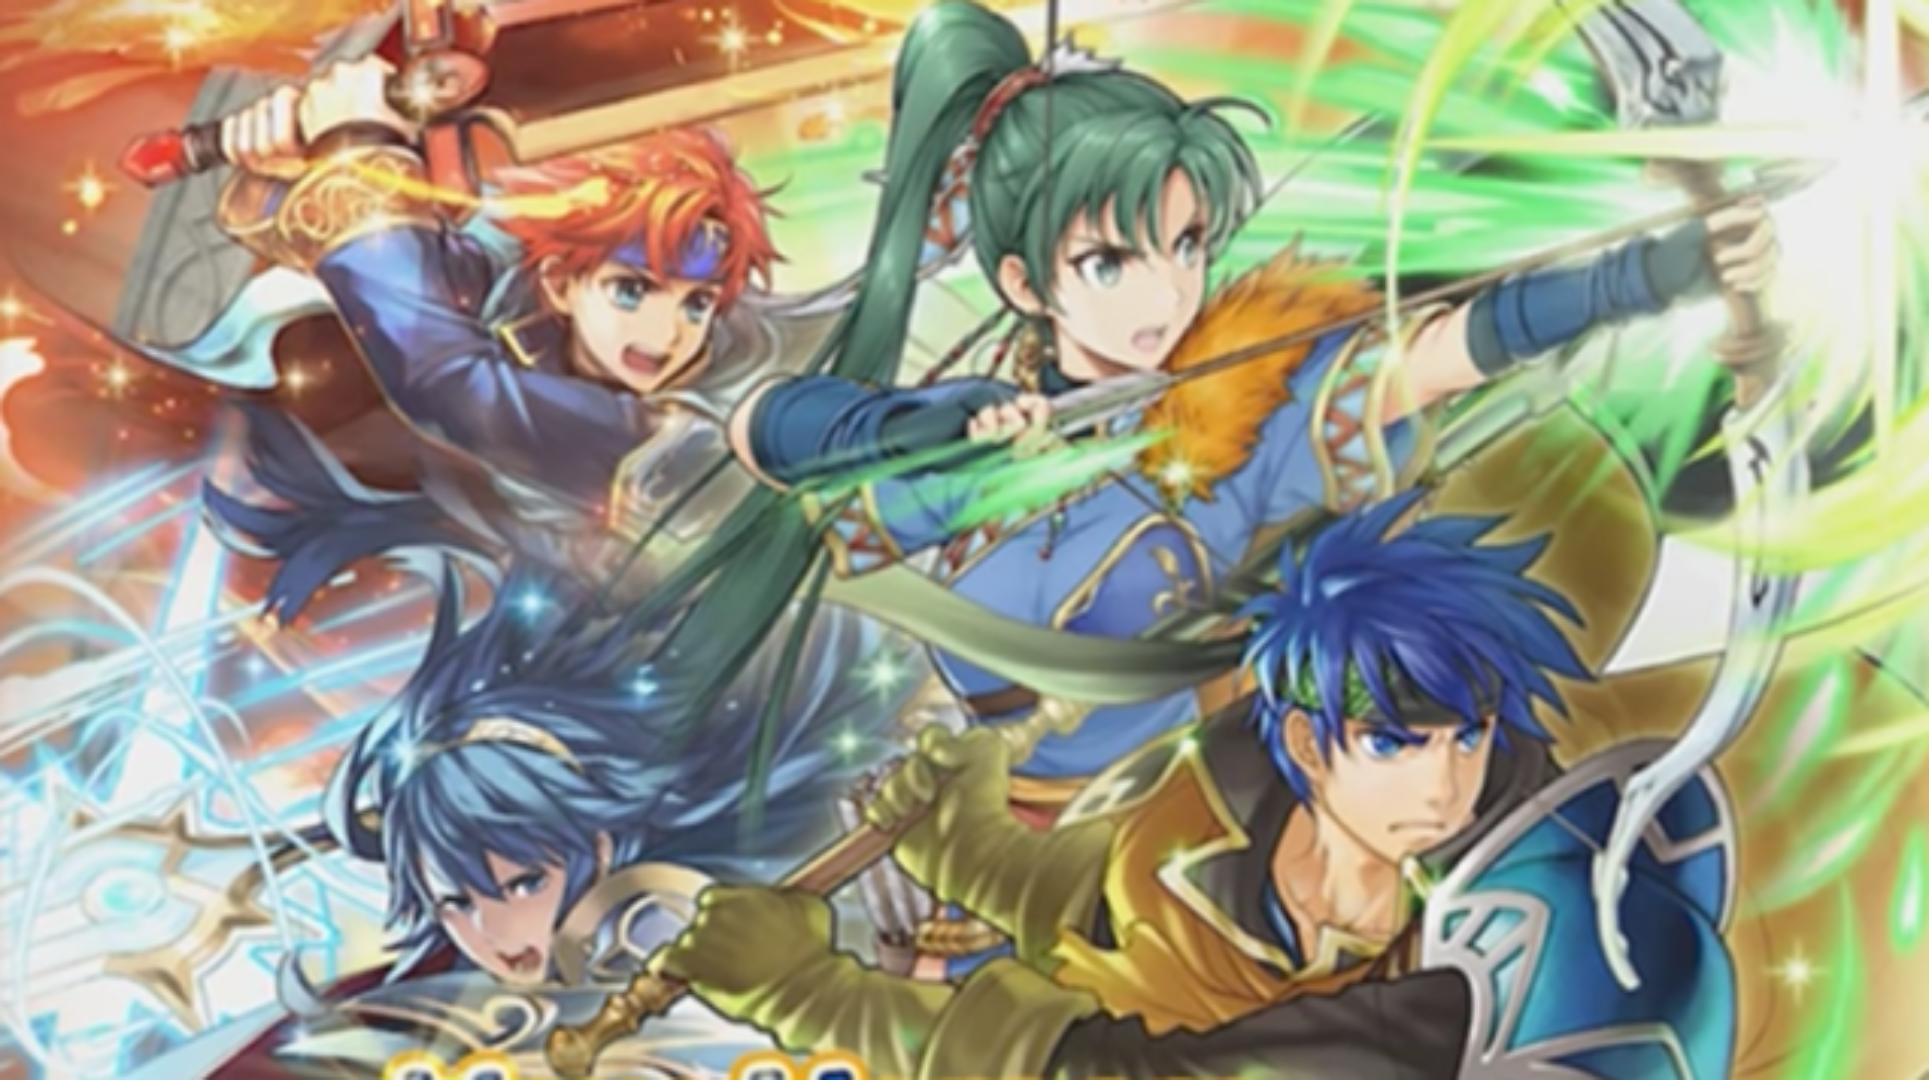 Fire Emblem Heroes Choose Your Legends Broadcast Reveals Winners And Special Heroes